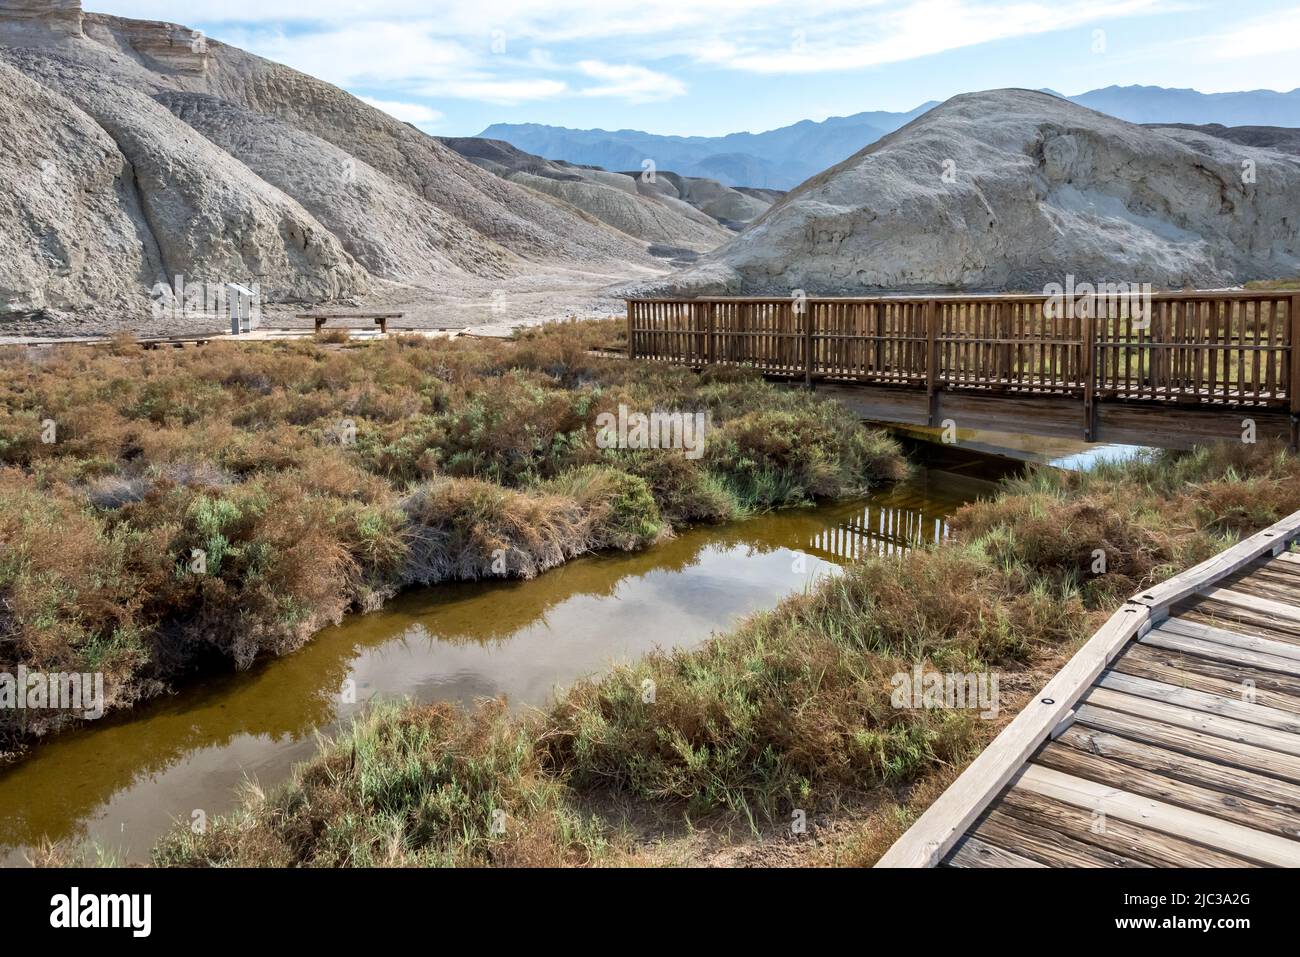 Salt Creek flows beneath a bridge in Death Valley, where visitors can learn about a rare pup fish on this interpretive boardwalk trail. Stock Photo